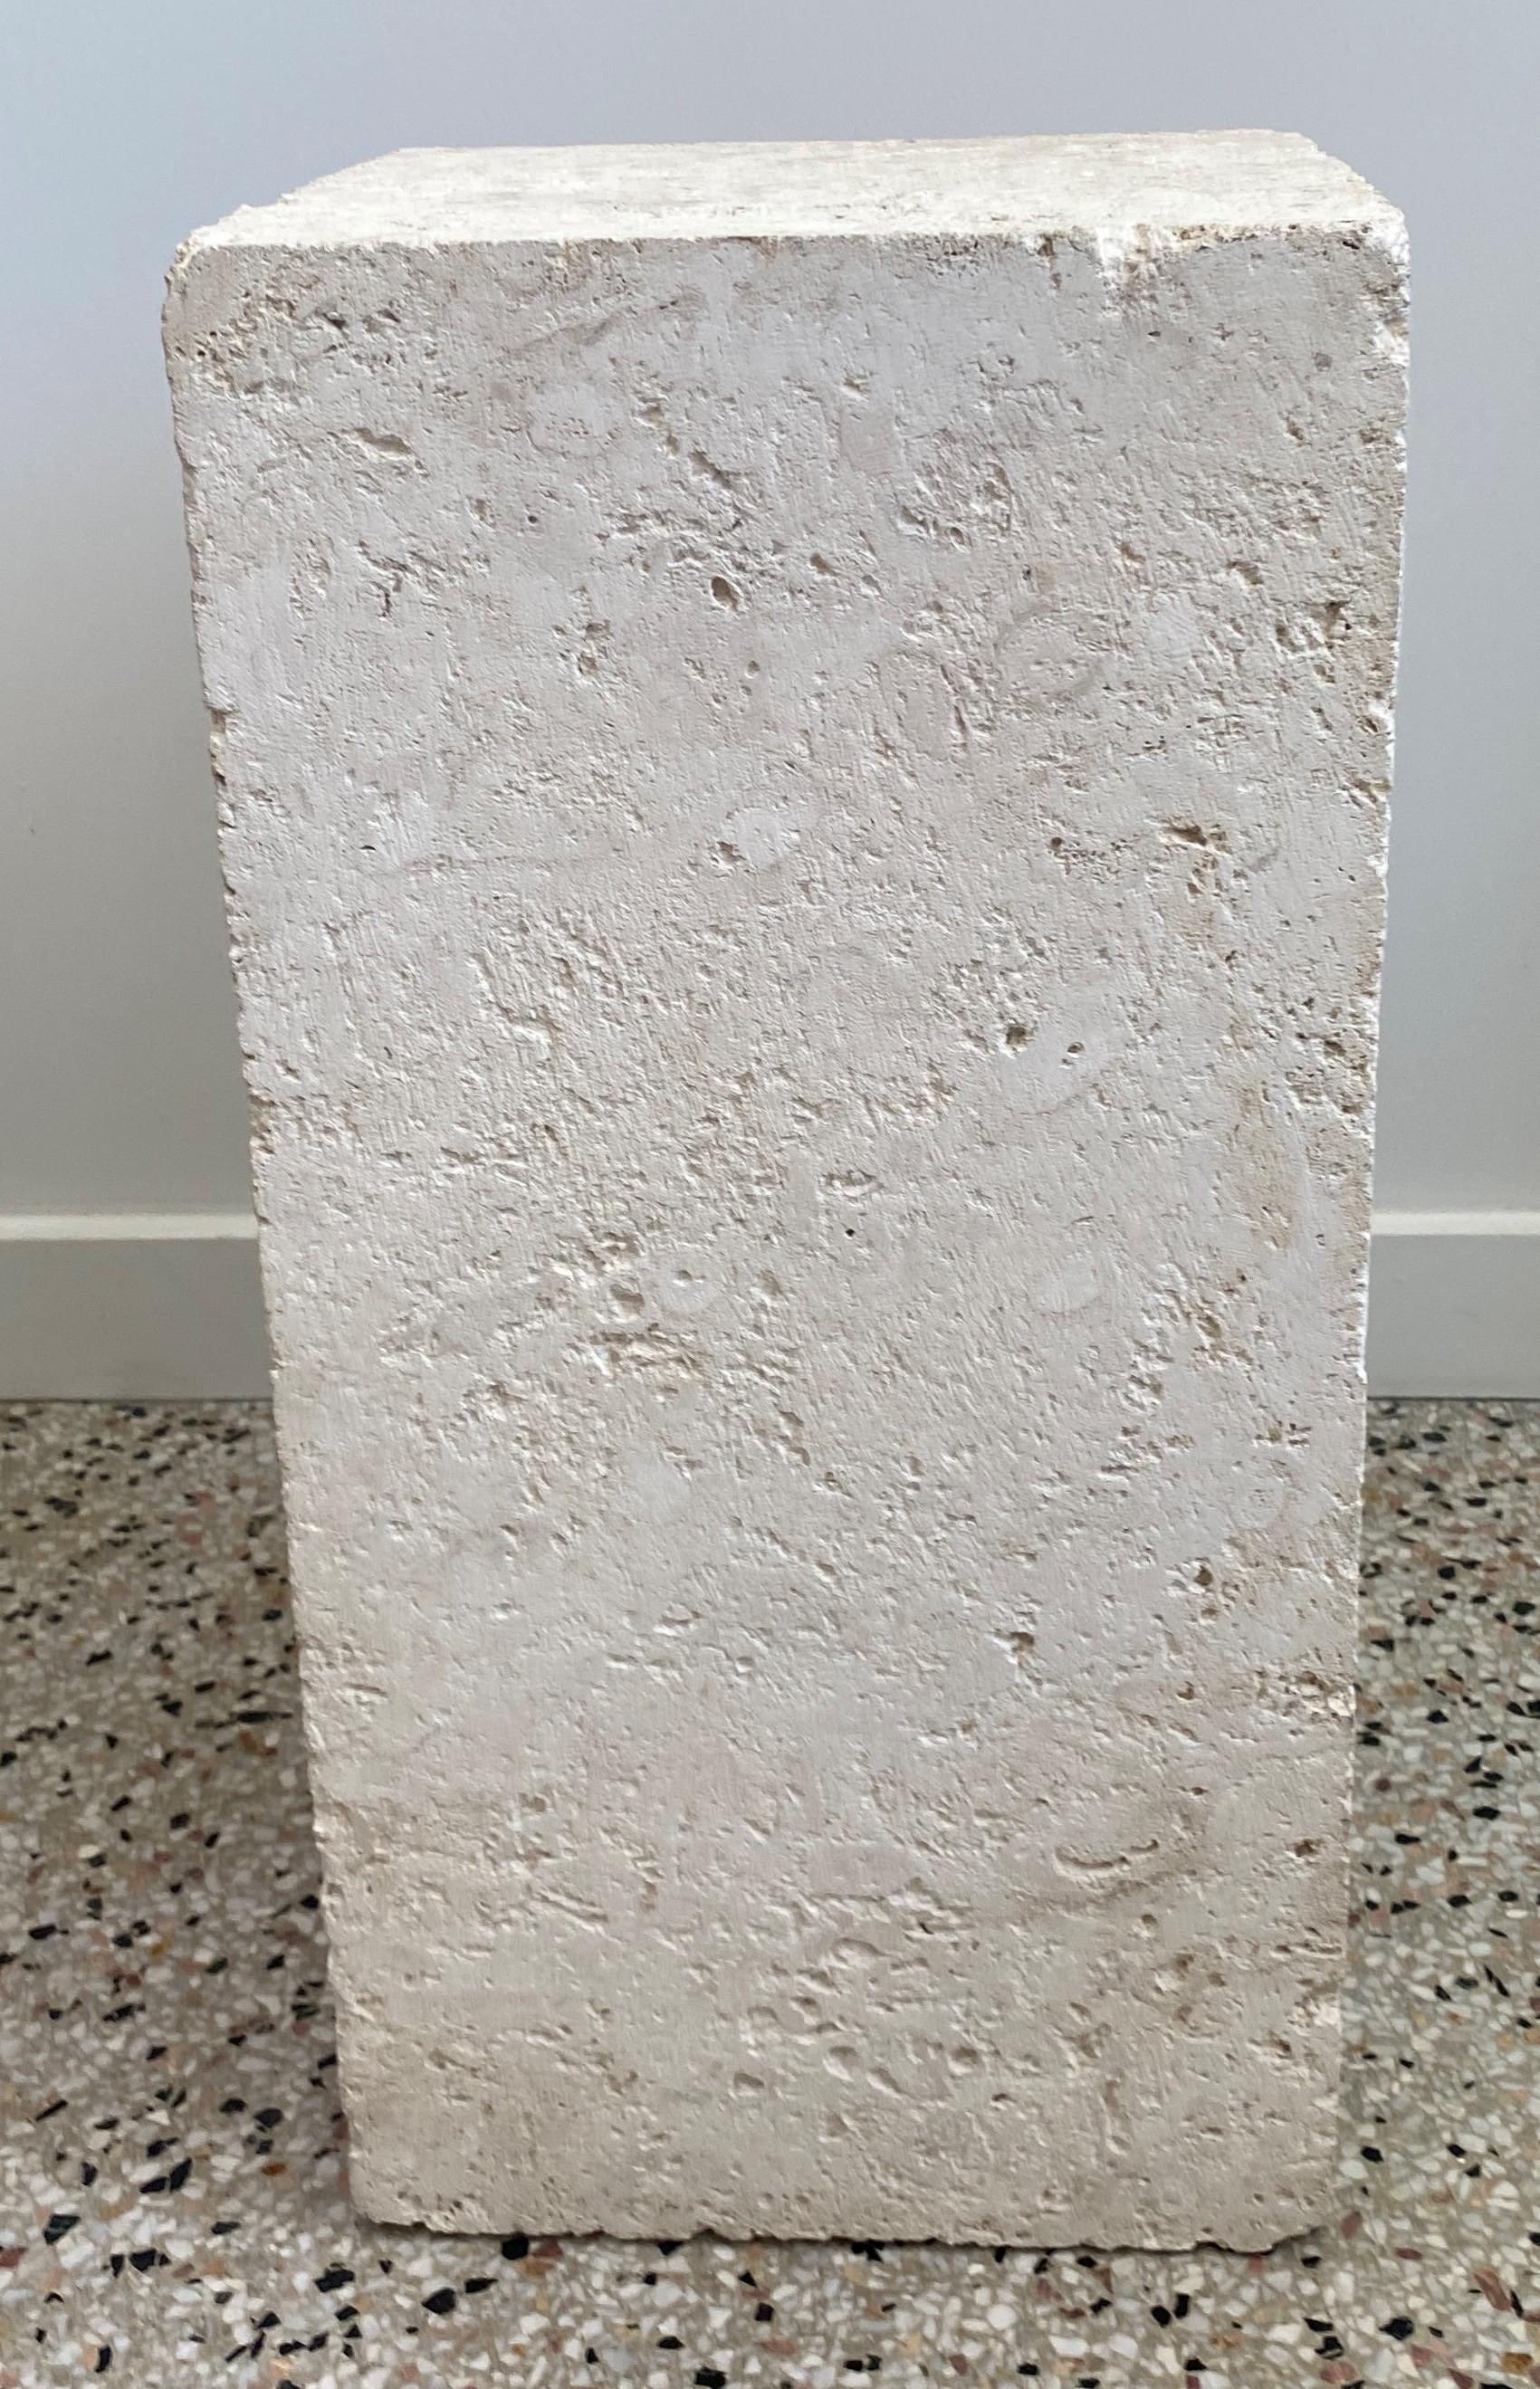 This stylish, clean-lined travertine marble pedestal will make the perfect perch for your sculpture and could be used outdoors or indoors.